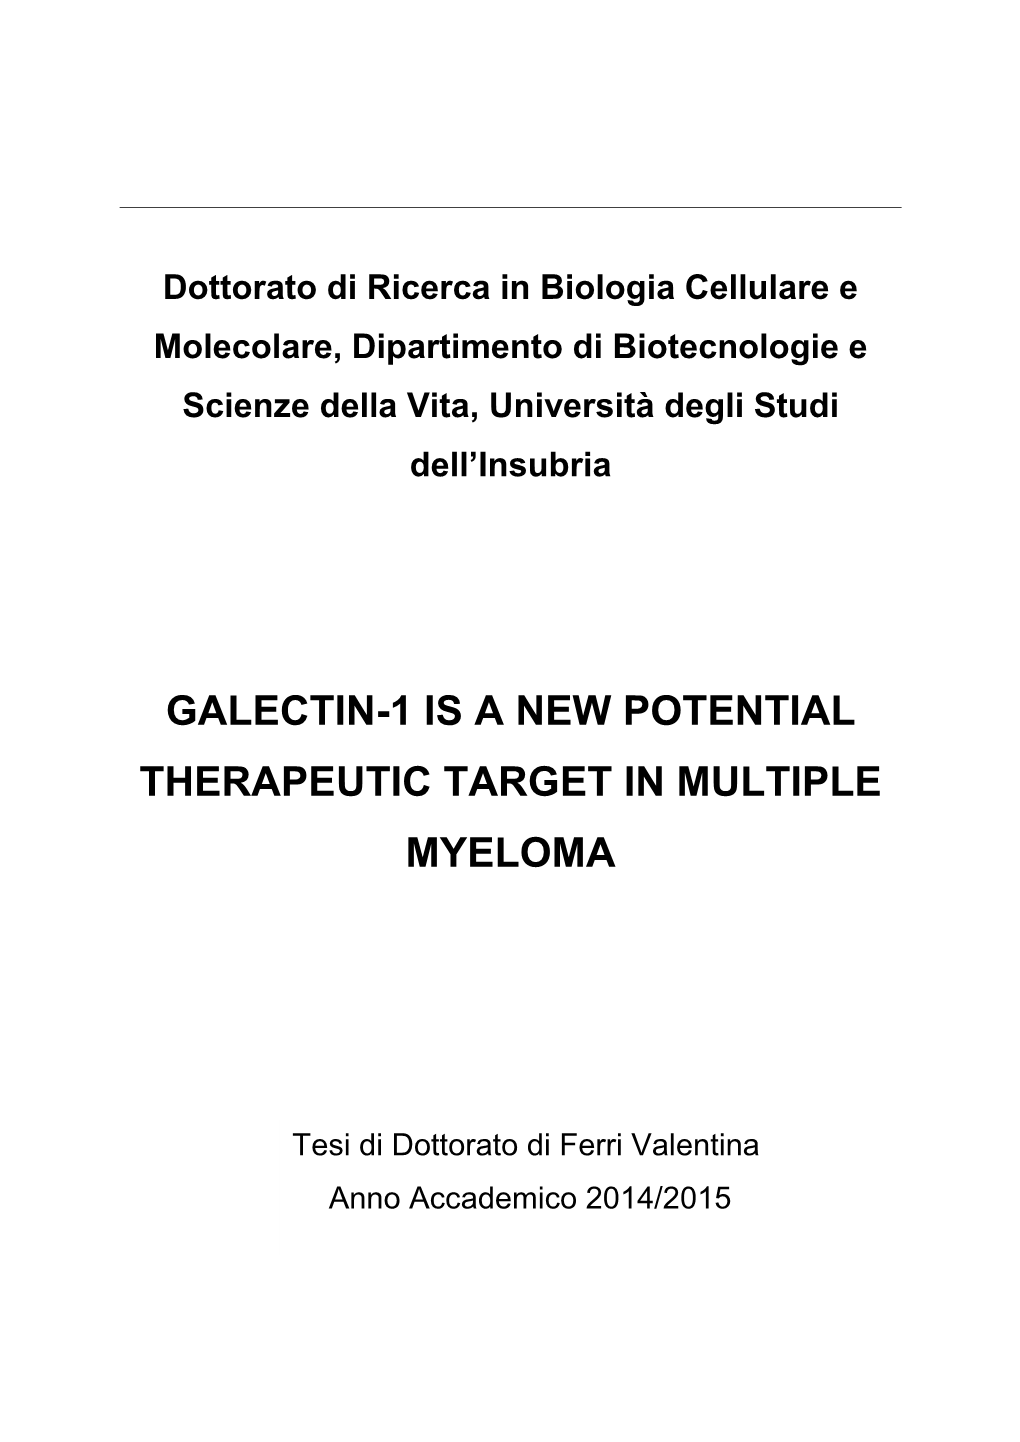 Galectin-1 Is a New Potential Therapeutic Target in Multiple Myeloma